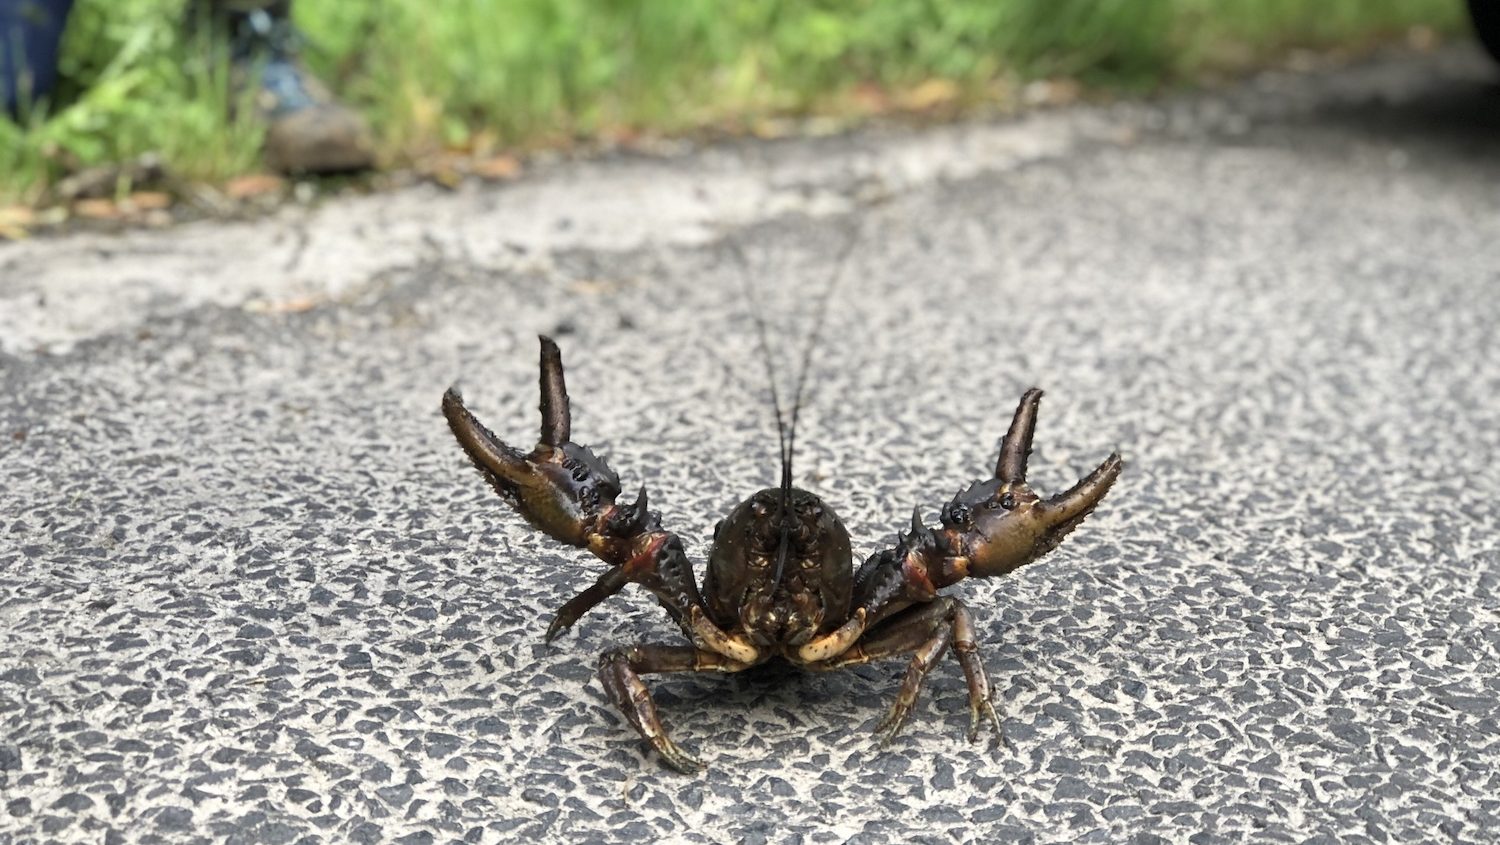 crayfish on a road with it's claws up